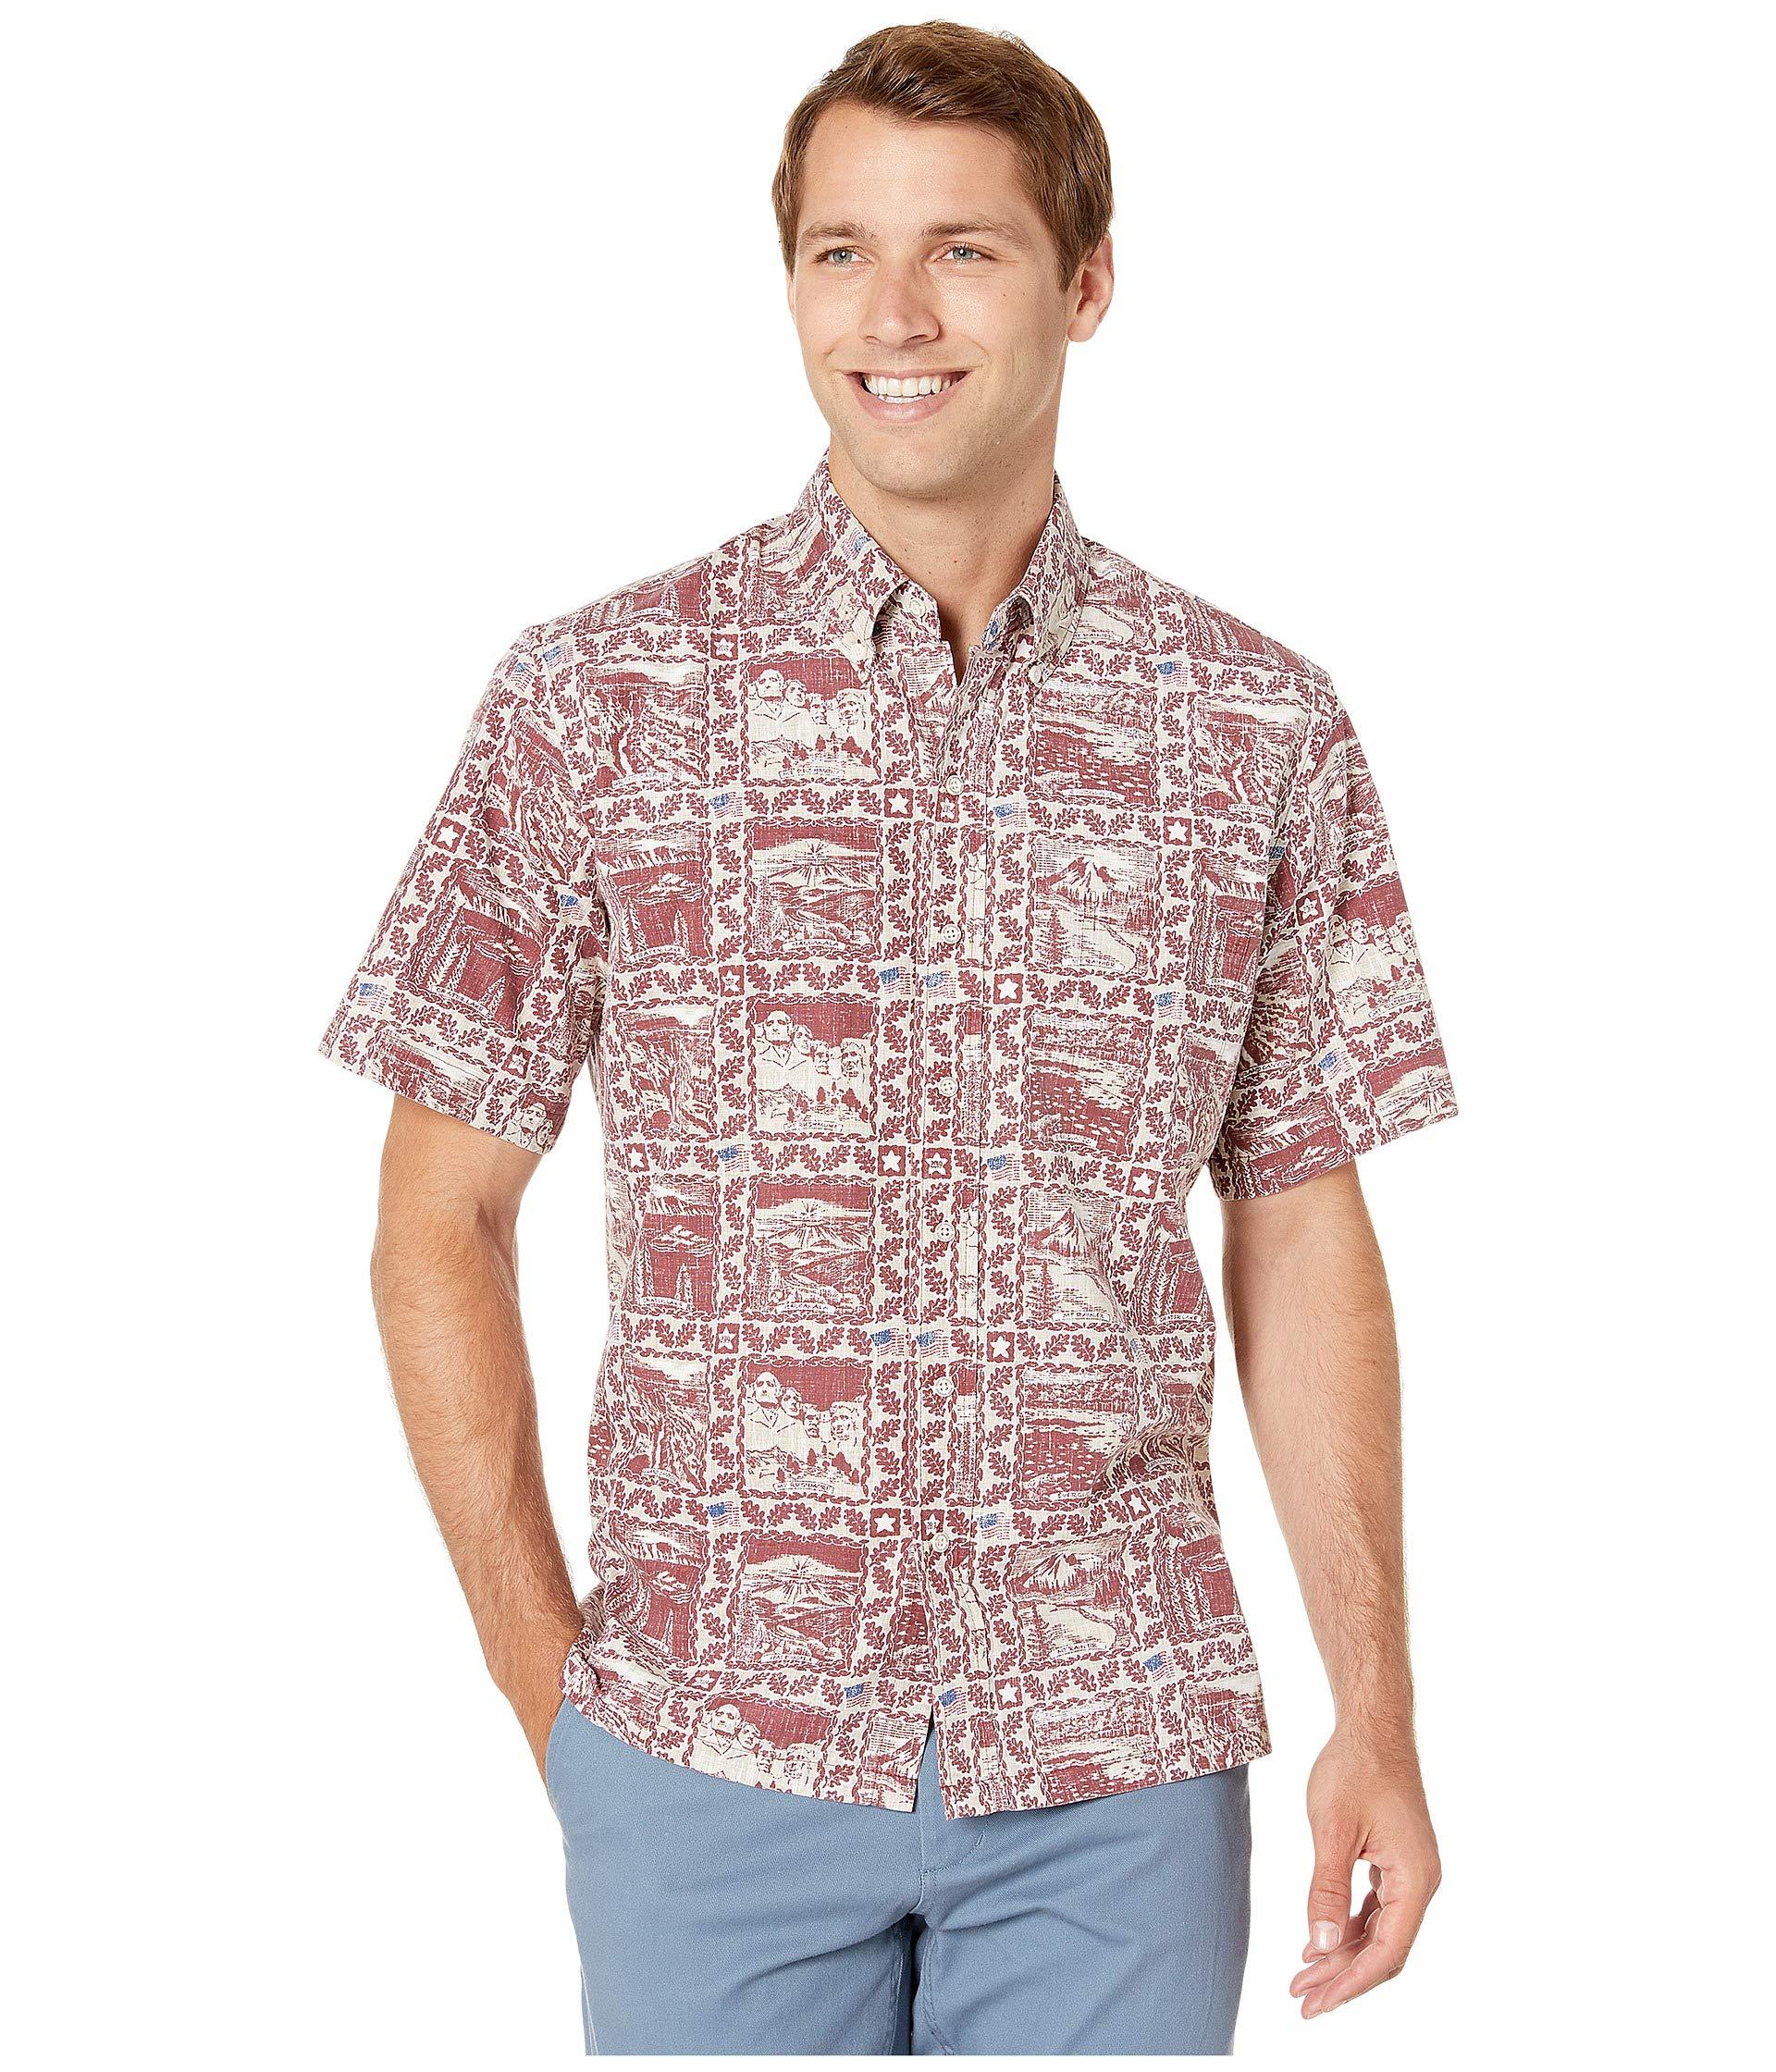 Reyn Spooner Cotton Summer Commemorative Classic Fit in Red for Men - Lyst